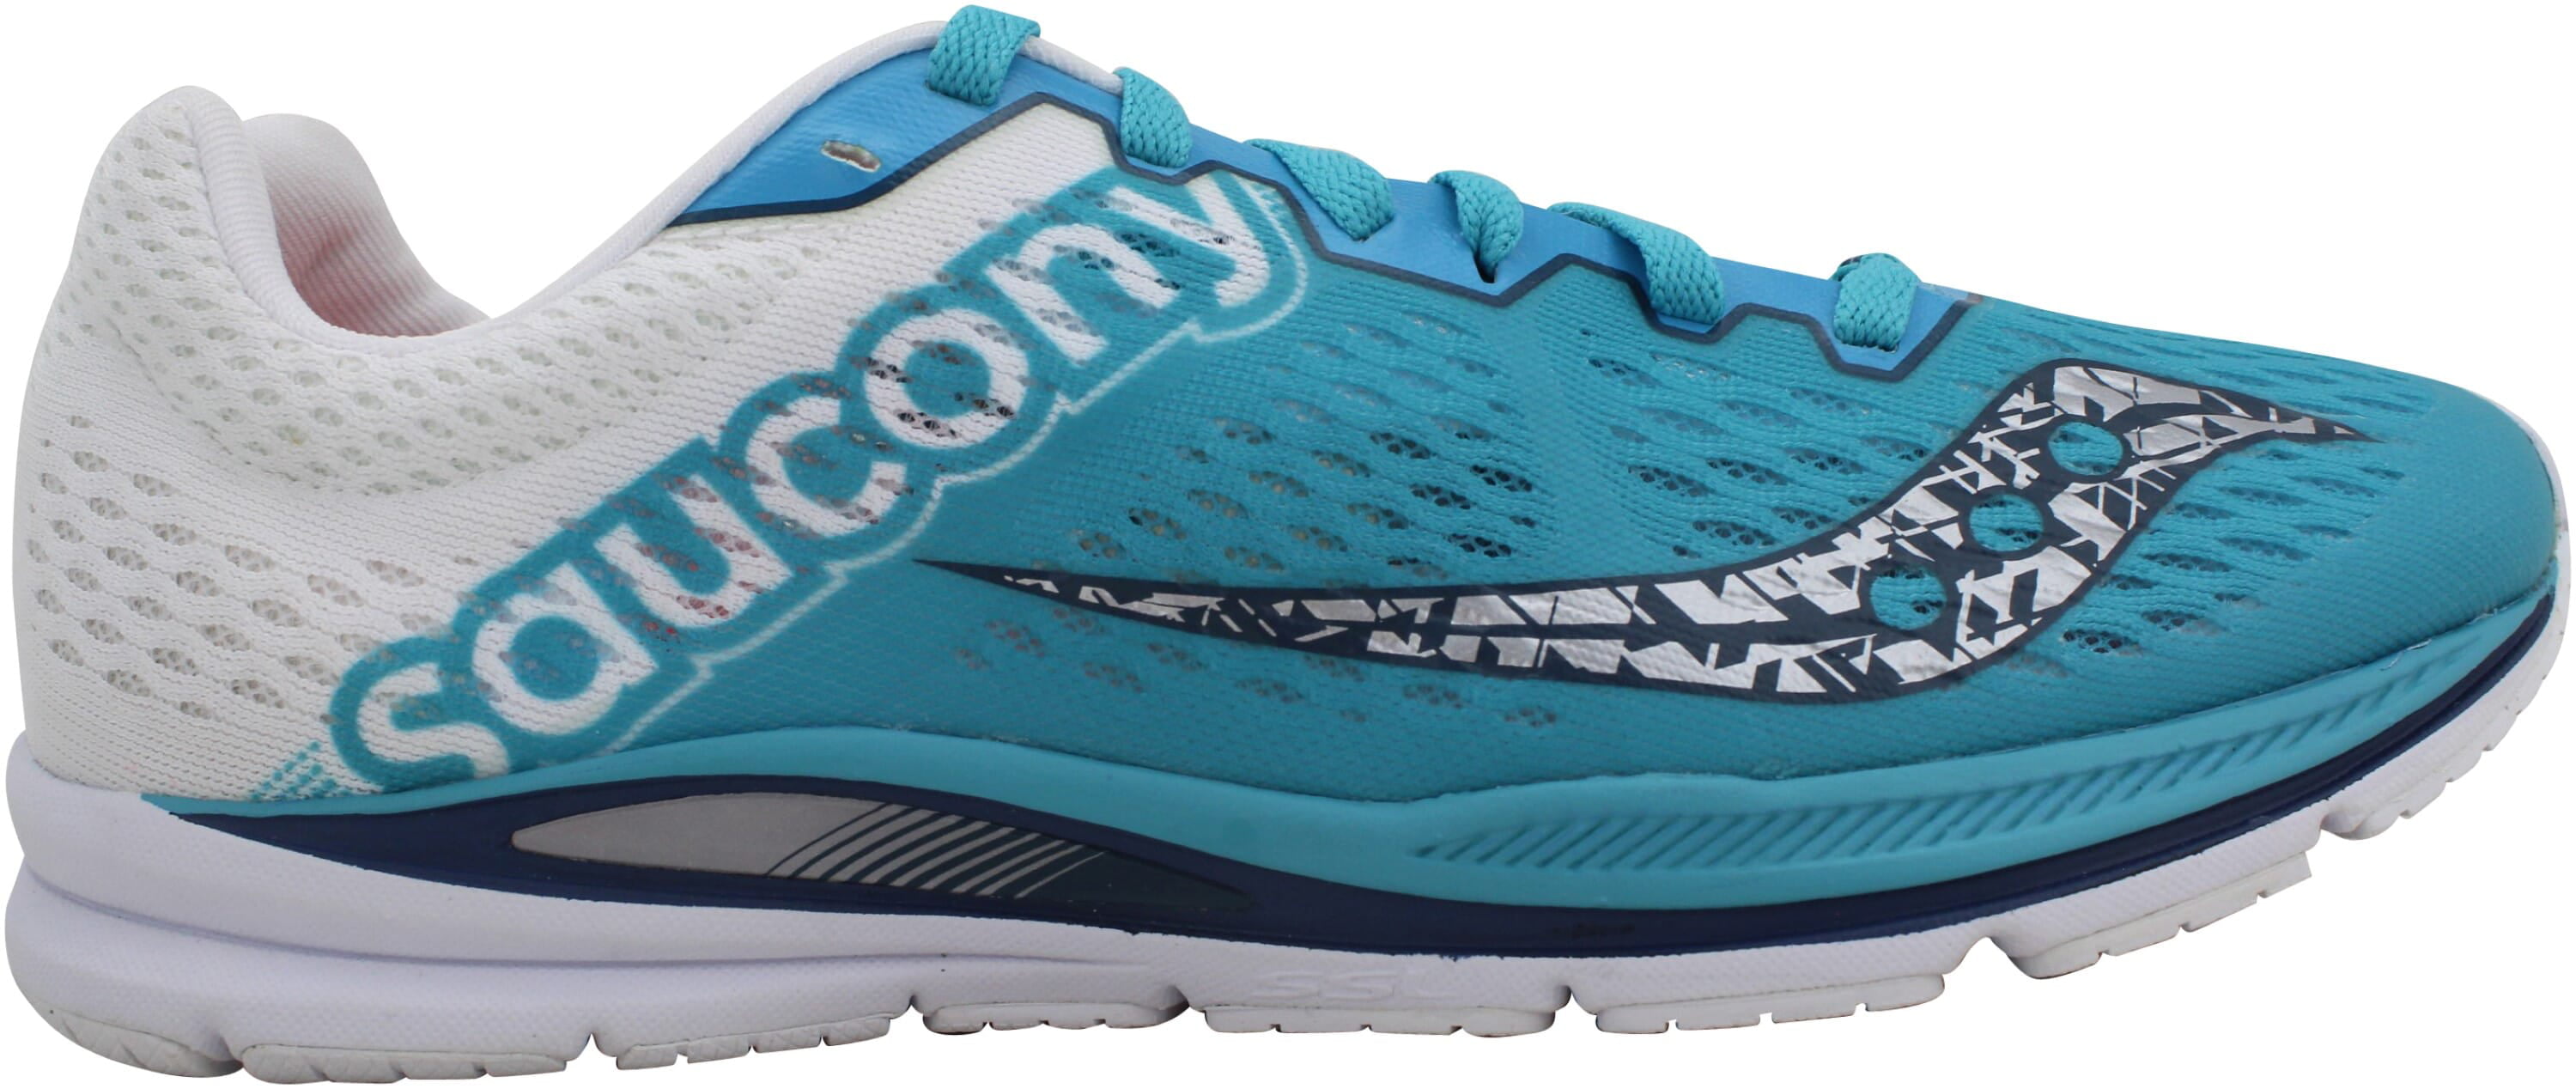 Saucony Womens Fastwitch 8 Running Shoes Trainers Sneakers Sports Teal 